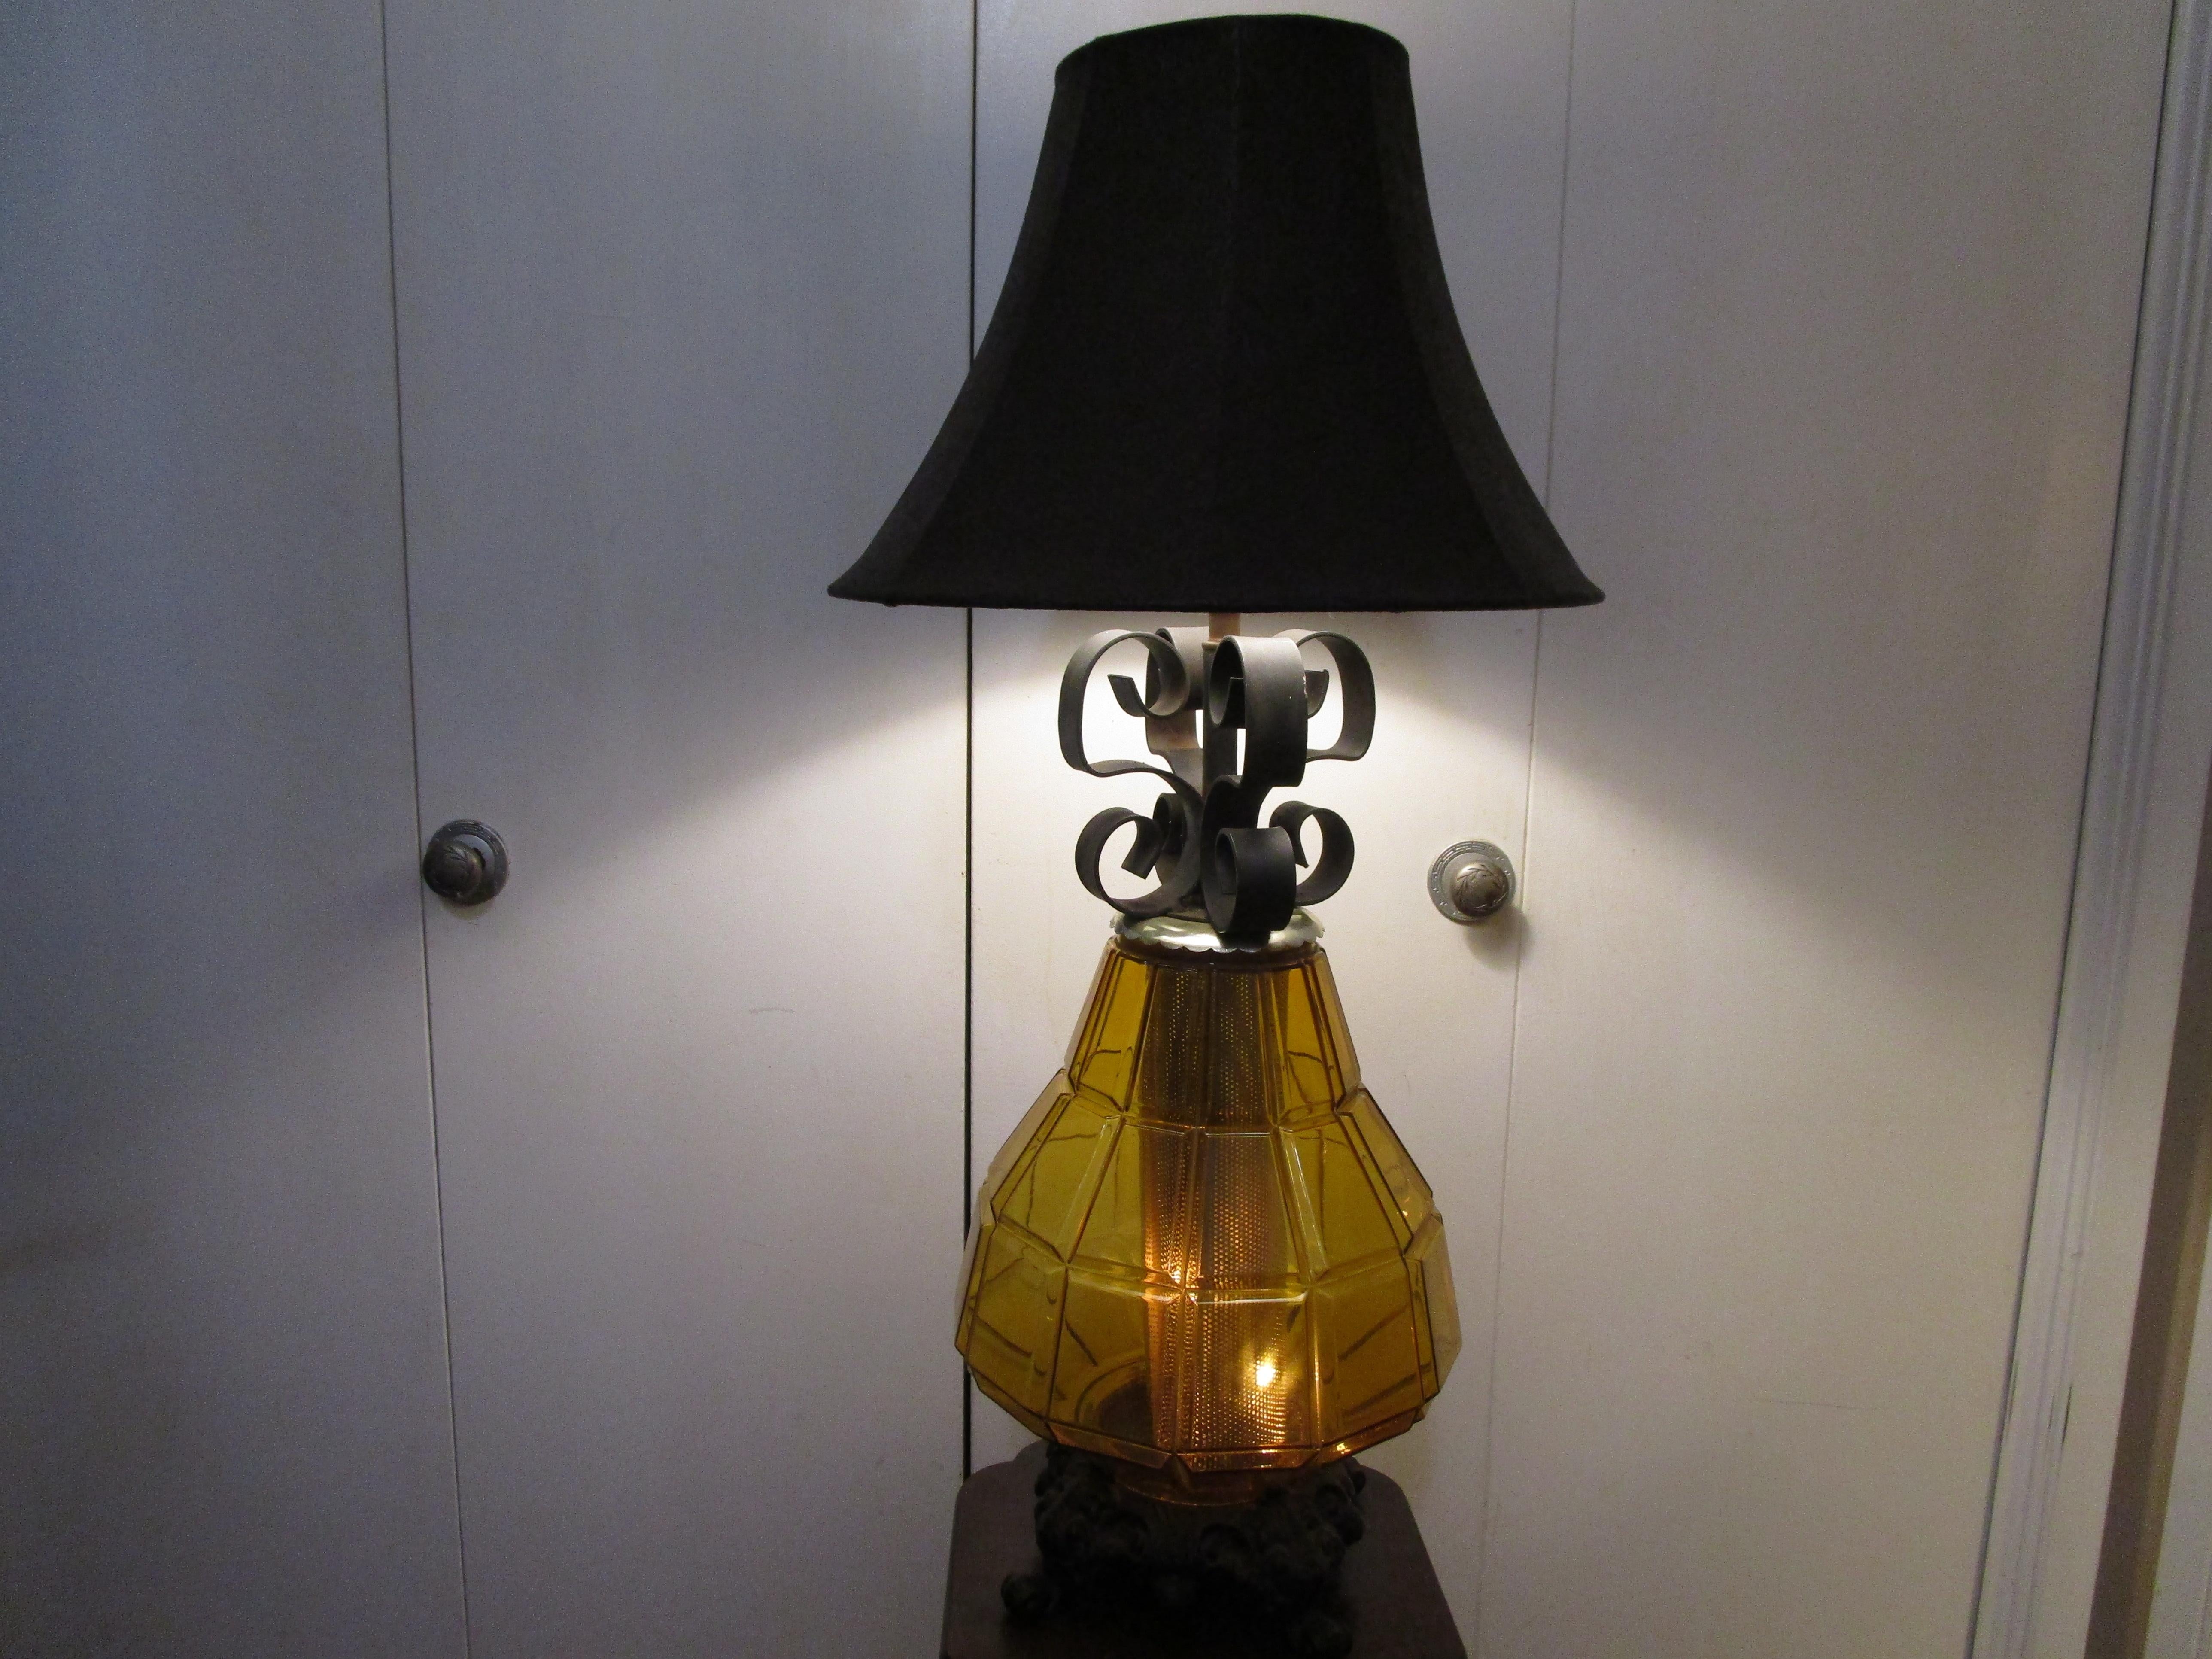 This is a gorgeous vintage wrought iron and pressed amber glass table lamp. The warmth and luminosity of amber glass is only part of the attraction for this mid century table lamp from the 1960s or 1970s according to our appraiser. It is reminiscent